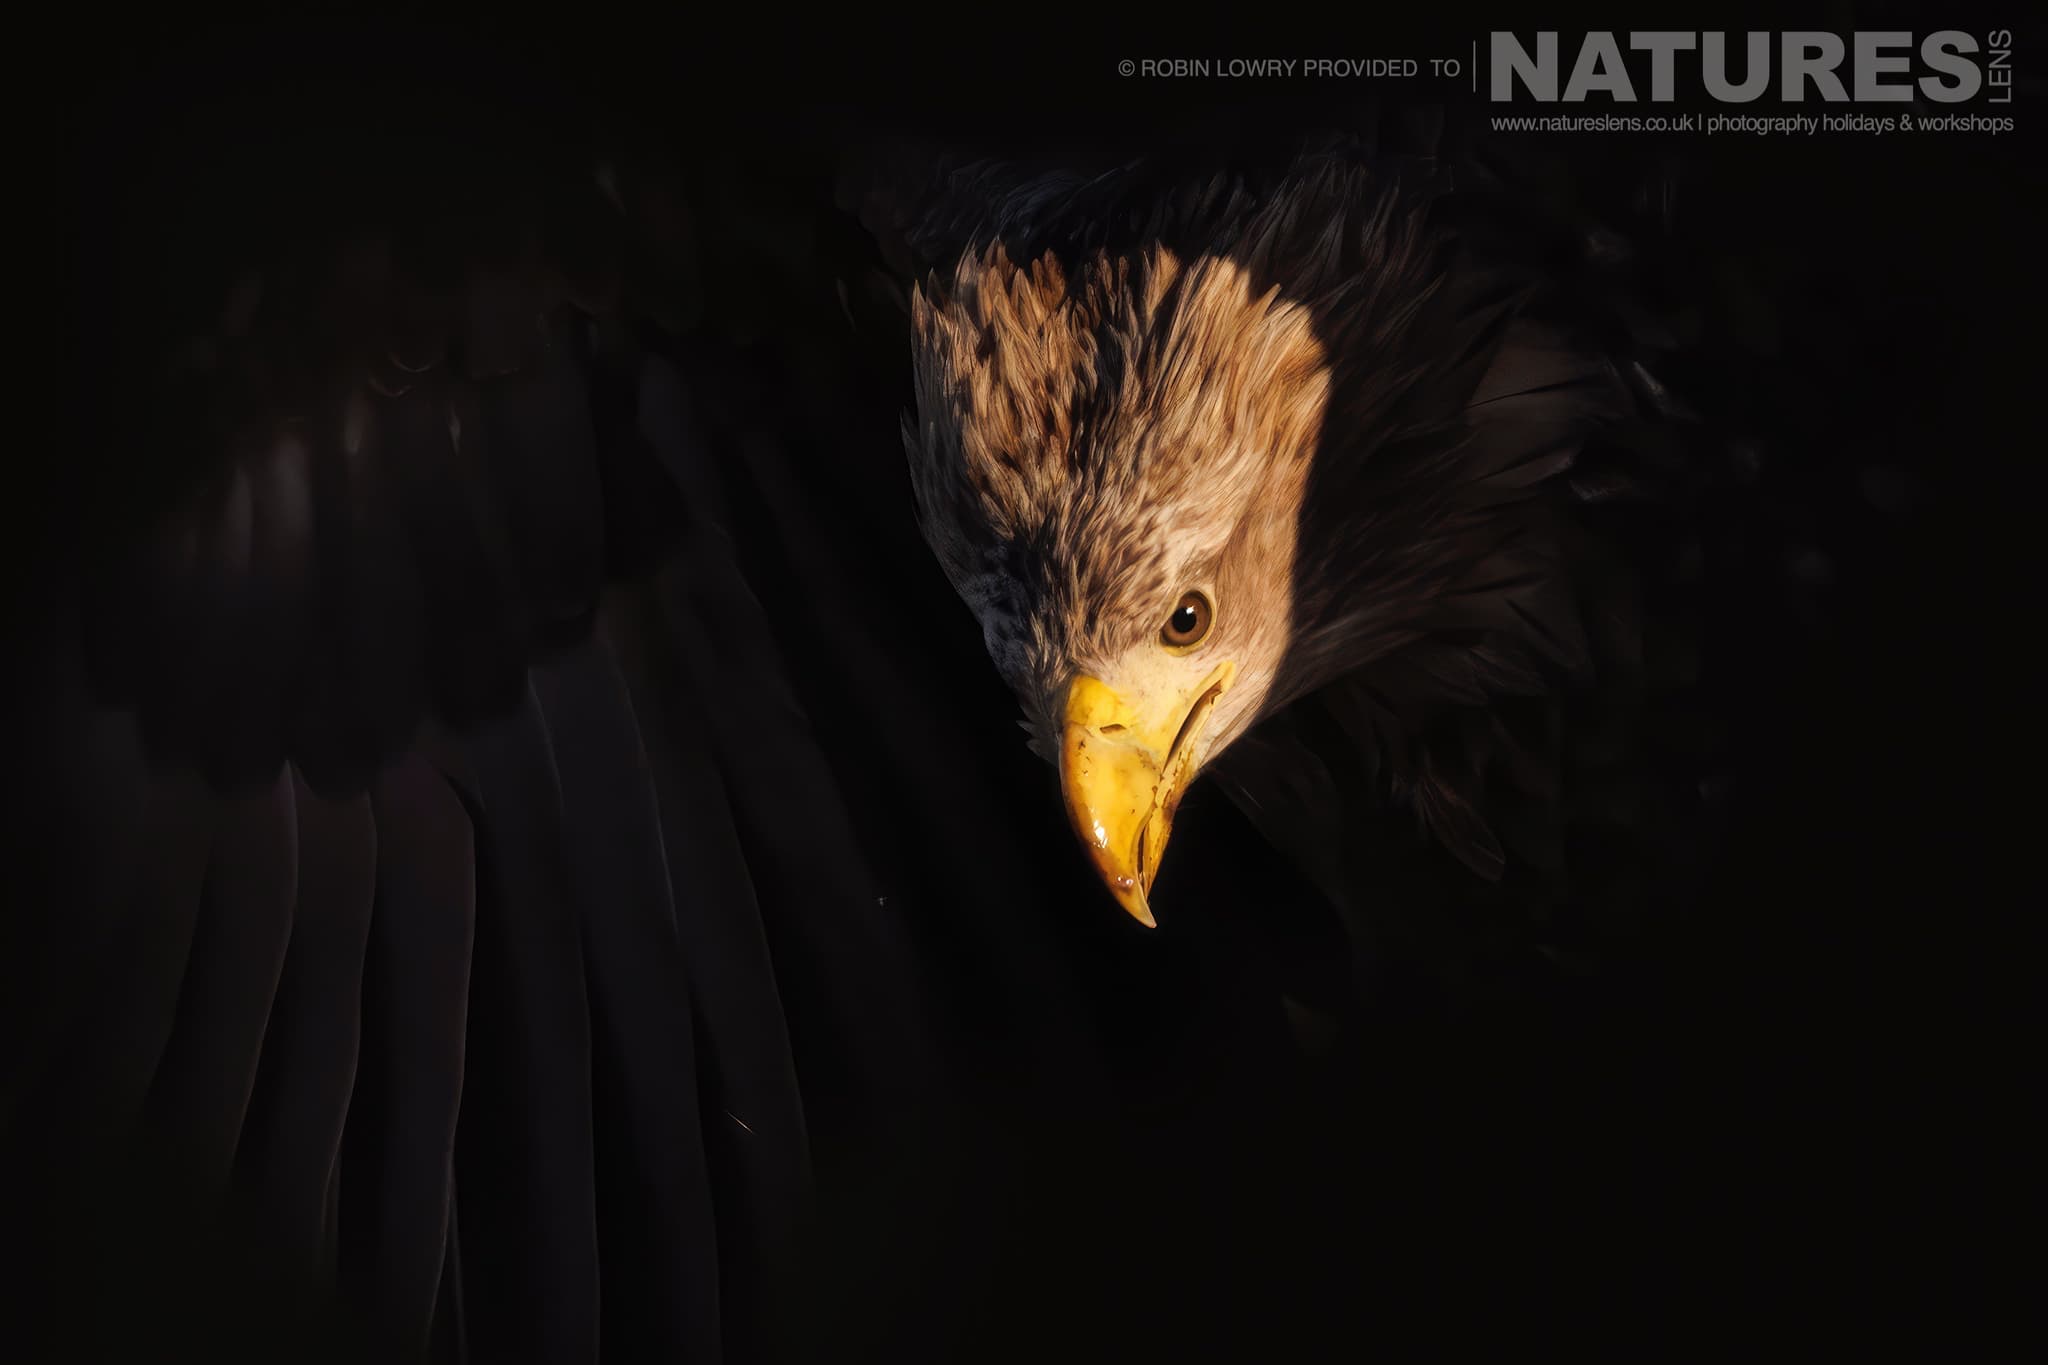 A White Tailed Eagle Only Partially Illuminated Due To The Golden Light The Largest Bird Species Found Amongst The Wildlife Of The Hortobágy National Park In Hungary